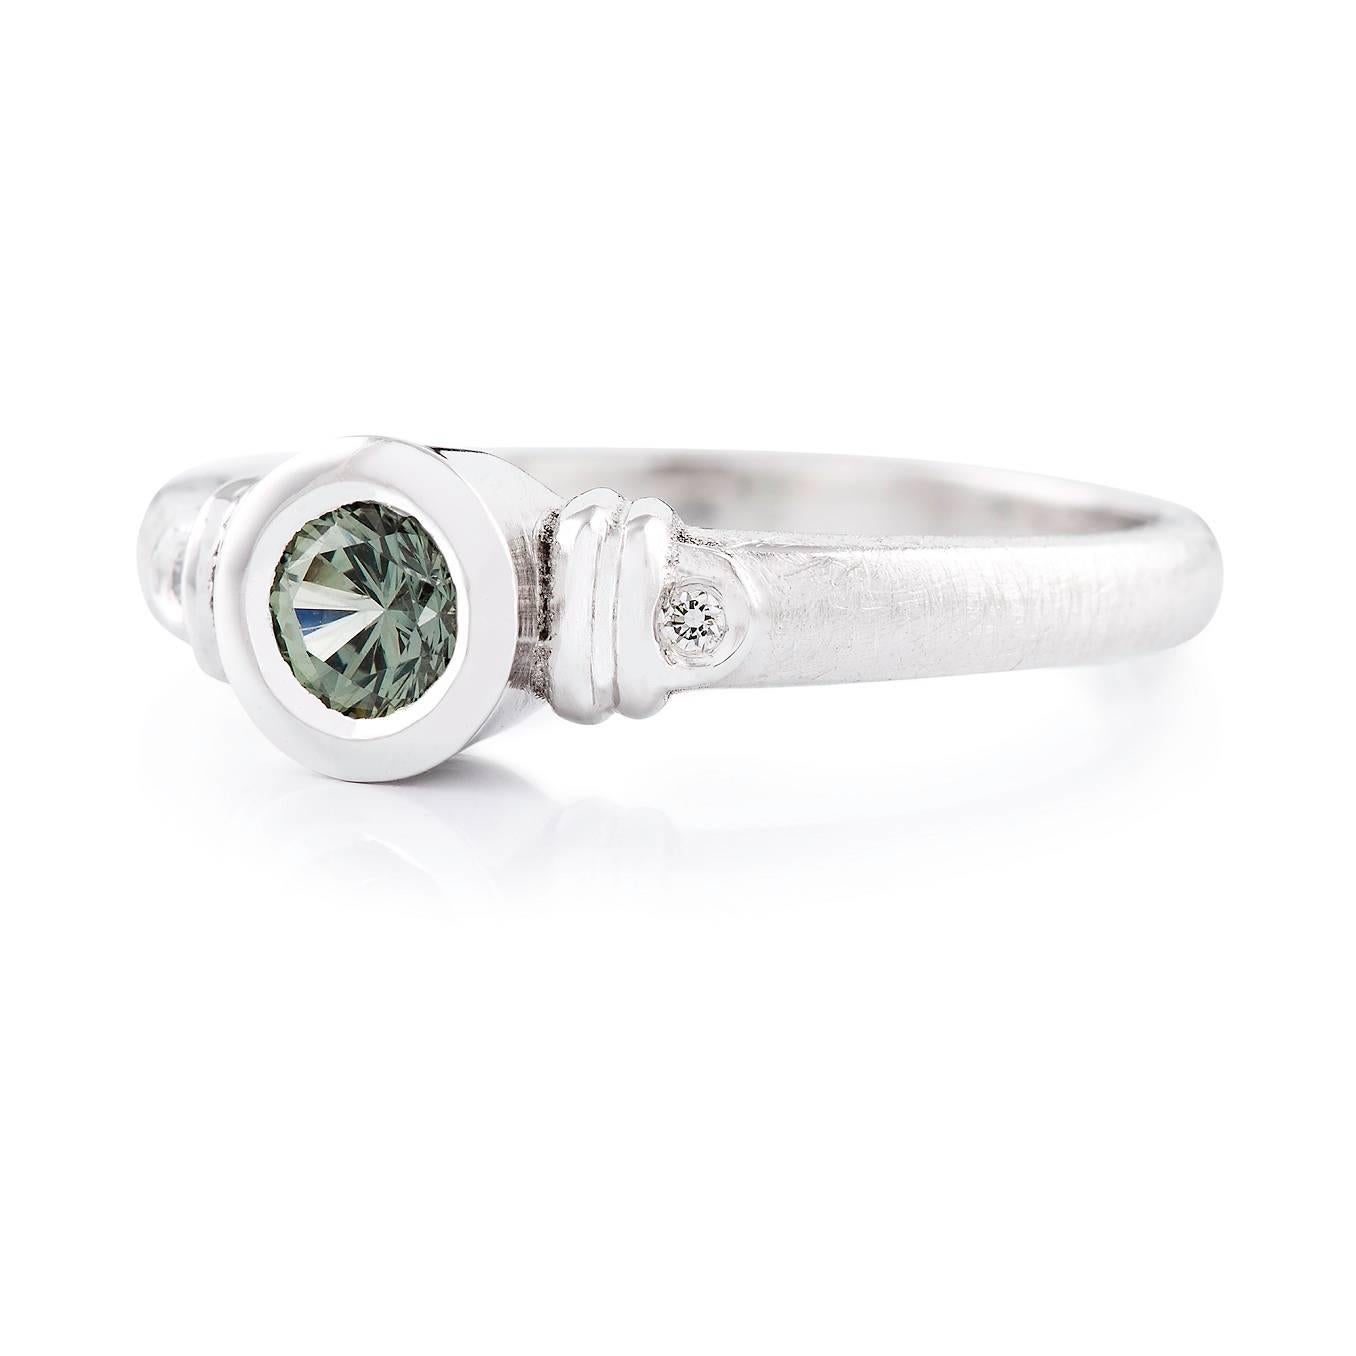  verde Zaffiro Ring

This gorgeous white gold dress ring features a stunning round green sapphire that is complimented with round brilliant ut diamonds on either side, all set in 18ct white gold. The band is made of 18ct white gold with an